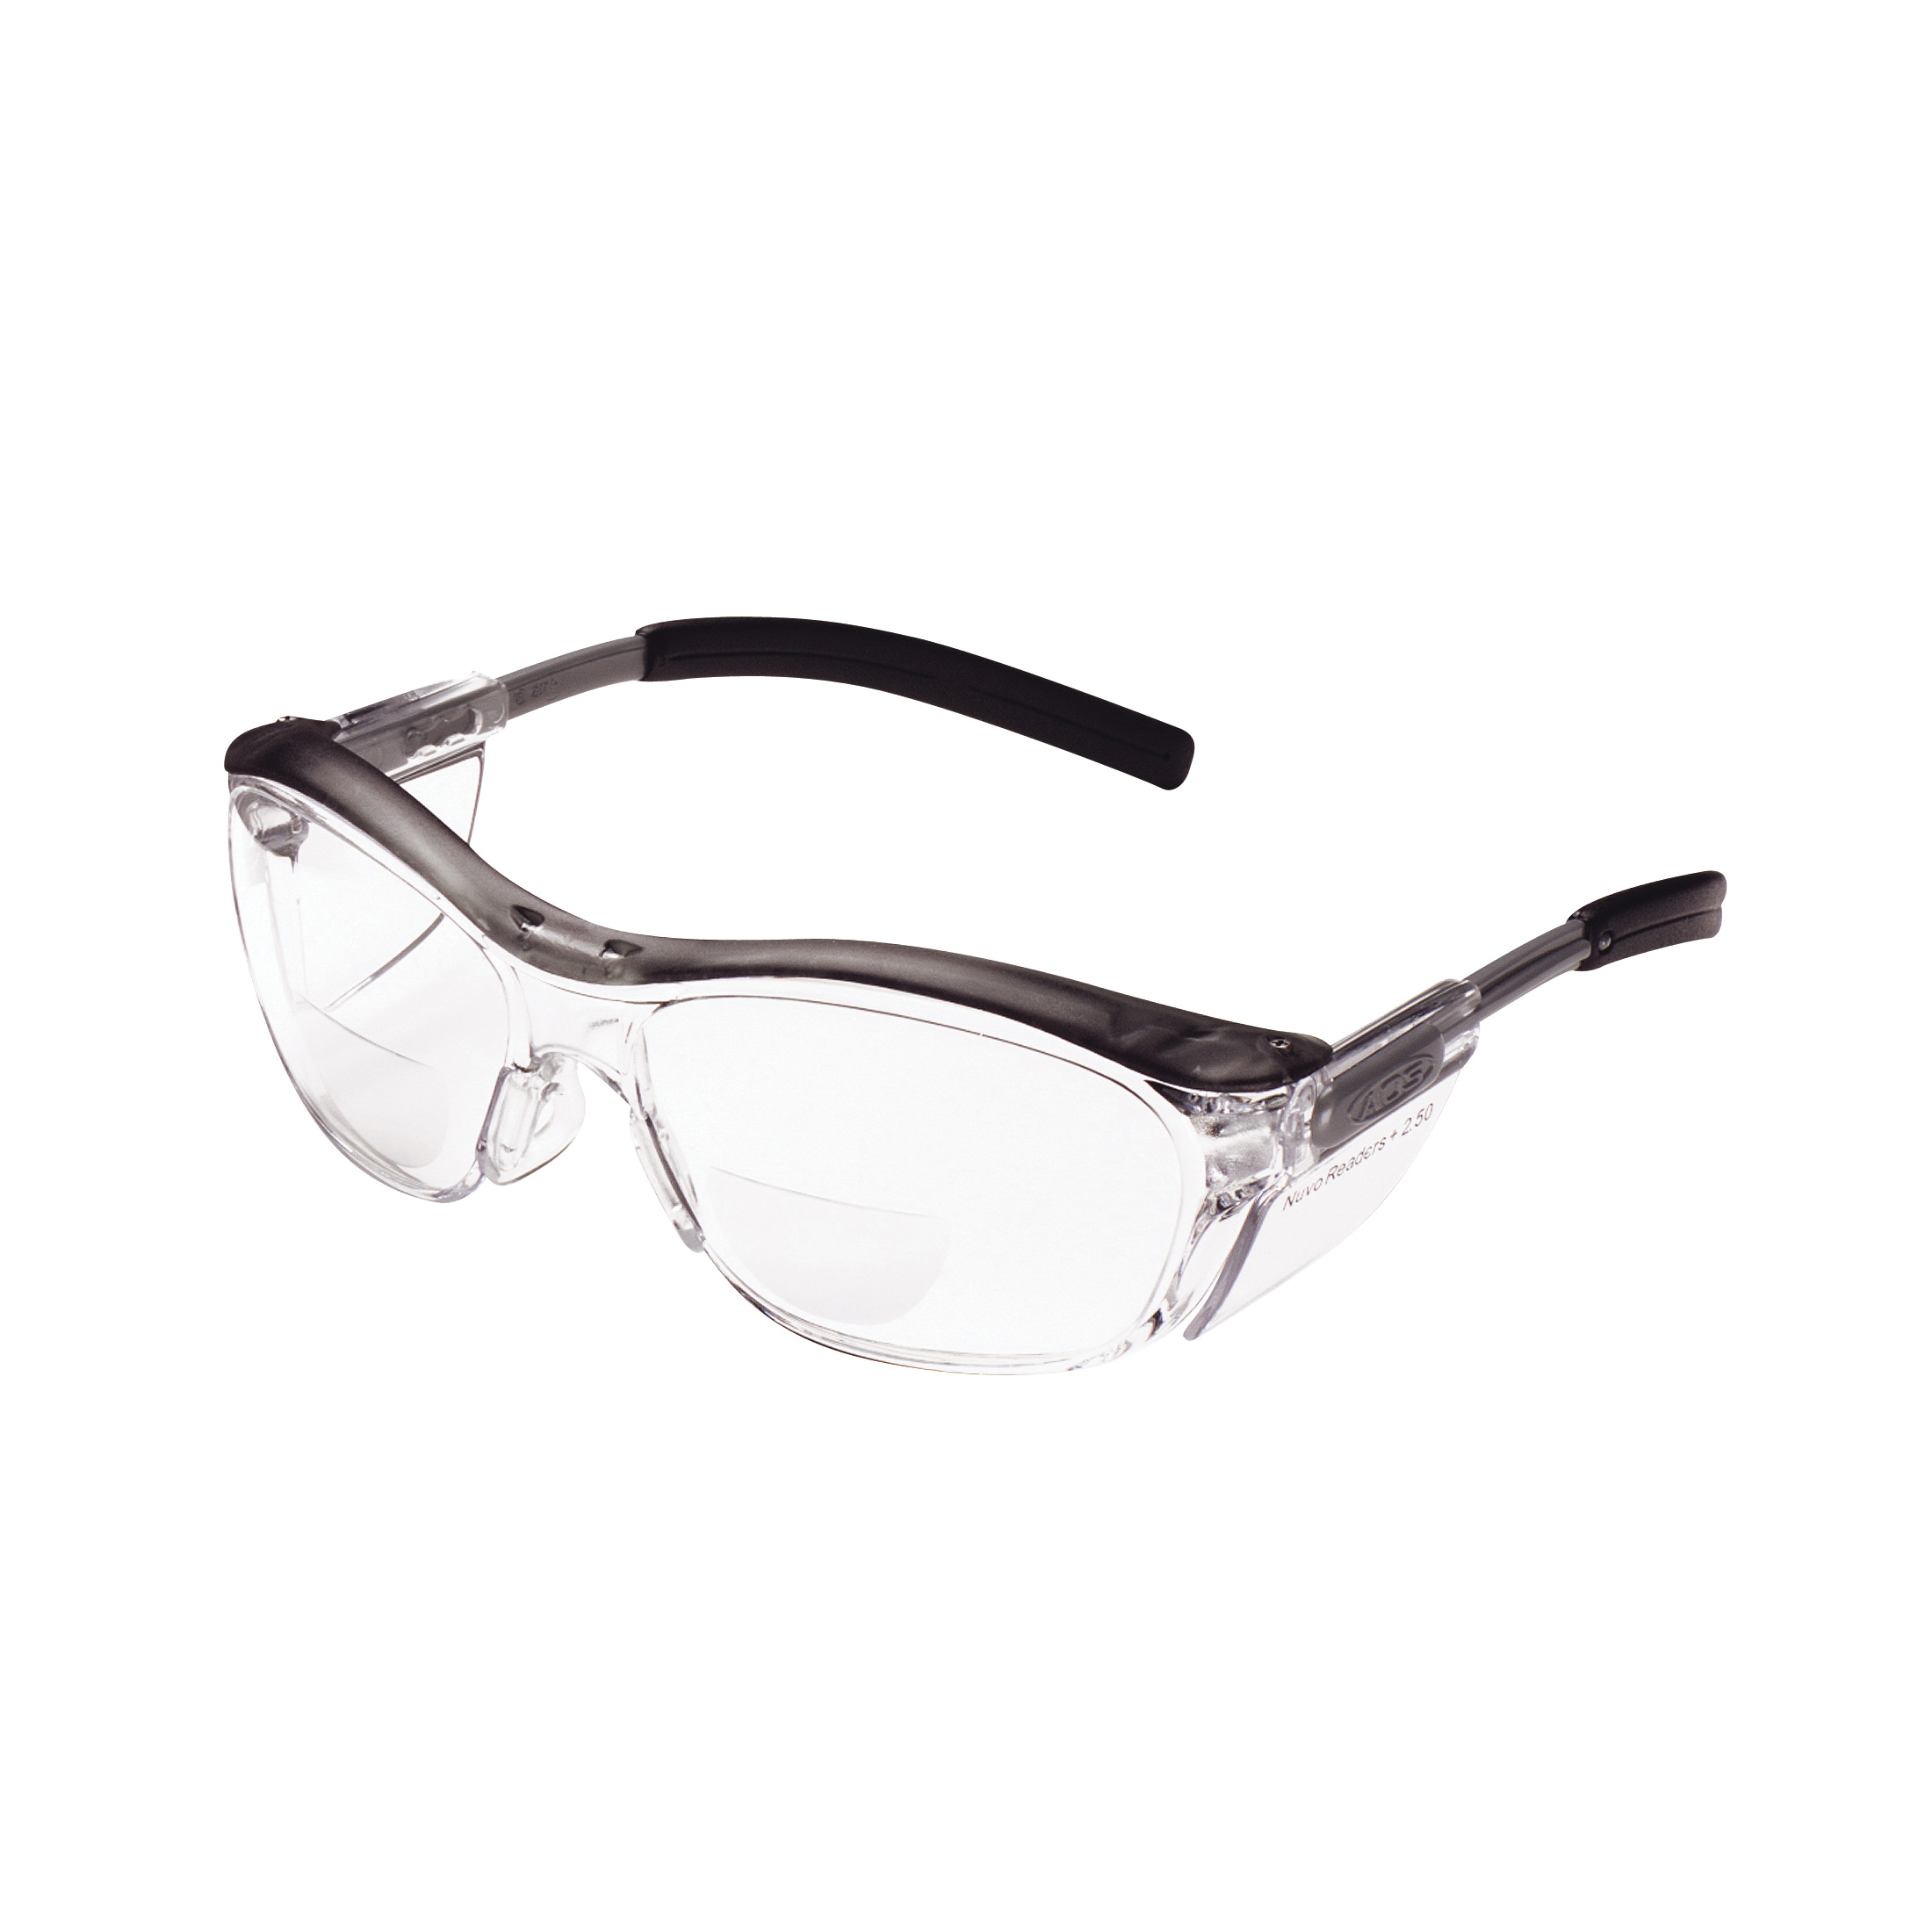 3M™ Nuvo™ 078371-62064 Bi-Focal Lens Lightweight Reader Protective Eyewear, 2.5 Diopter, Clear Lens, Gray, Plastic Frame, Polycarbonate Lens, 99.9 % UV Protection, ANSI Z87.1-2015, CSA Z94.3-2007